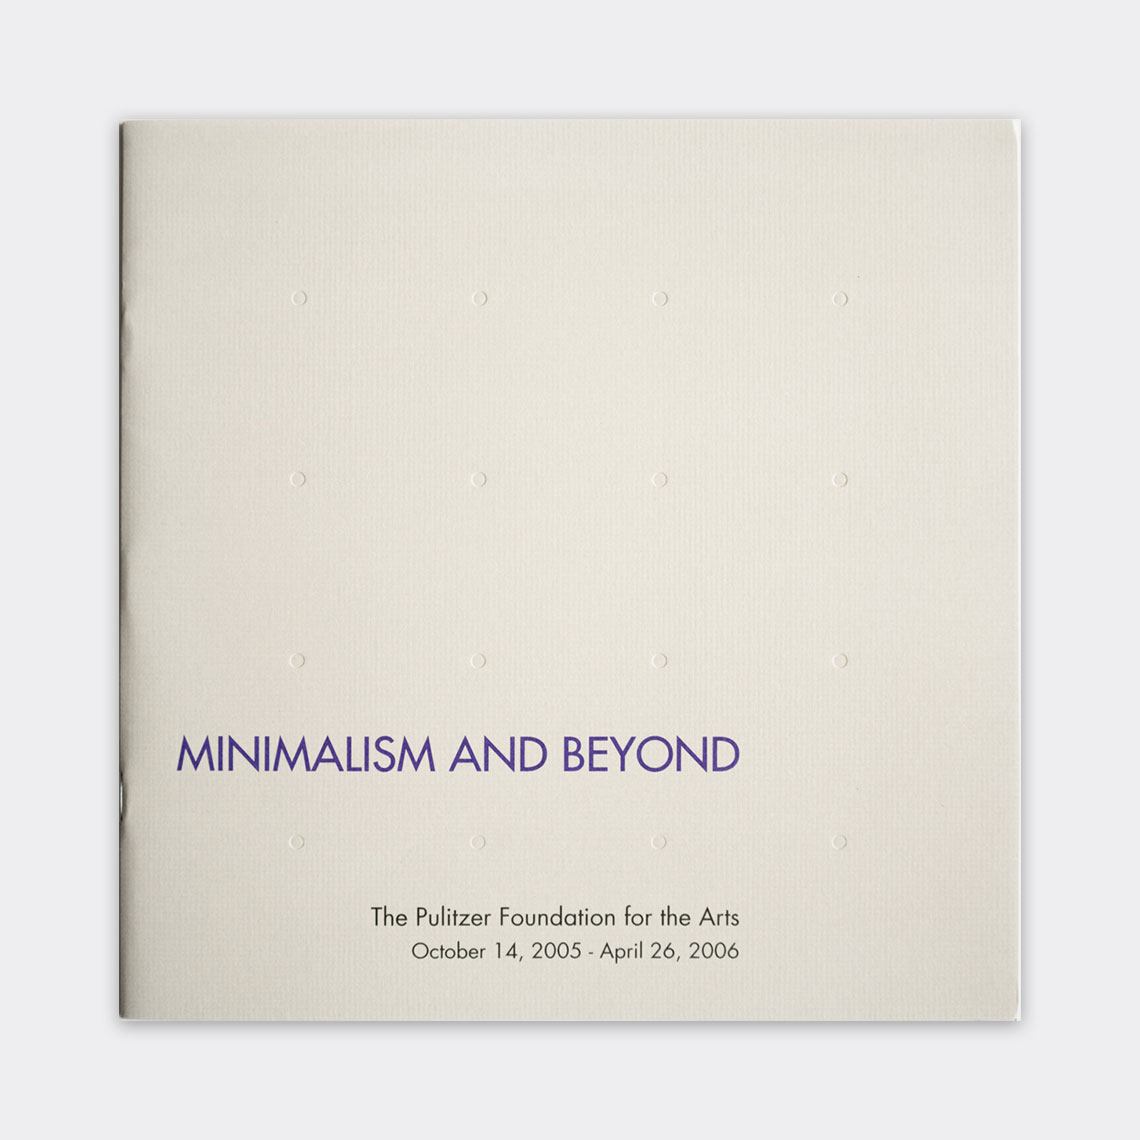 The exhibition catalogue cover for "Minimalism and Beyond."